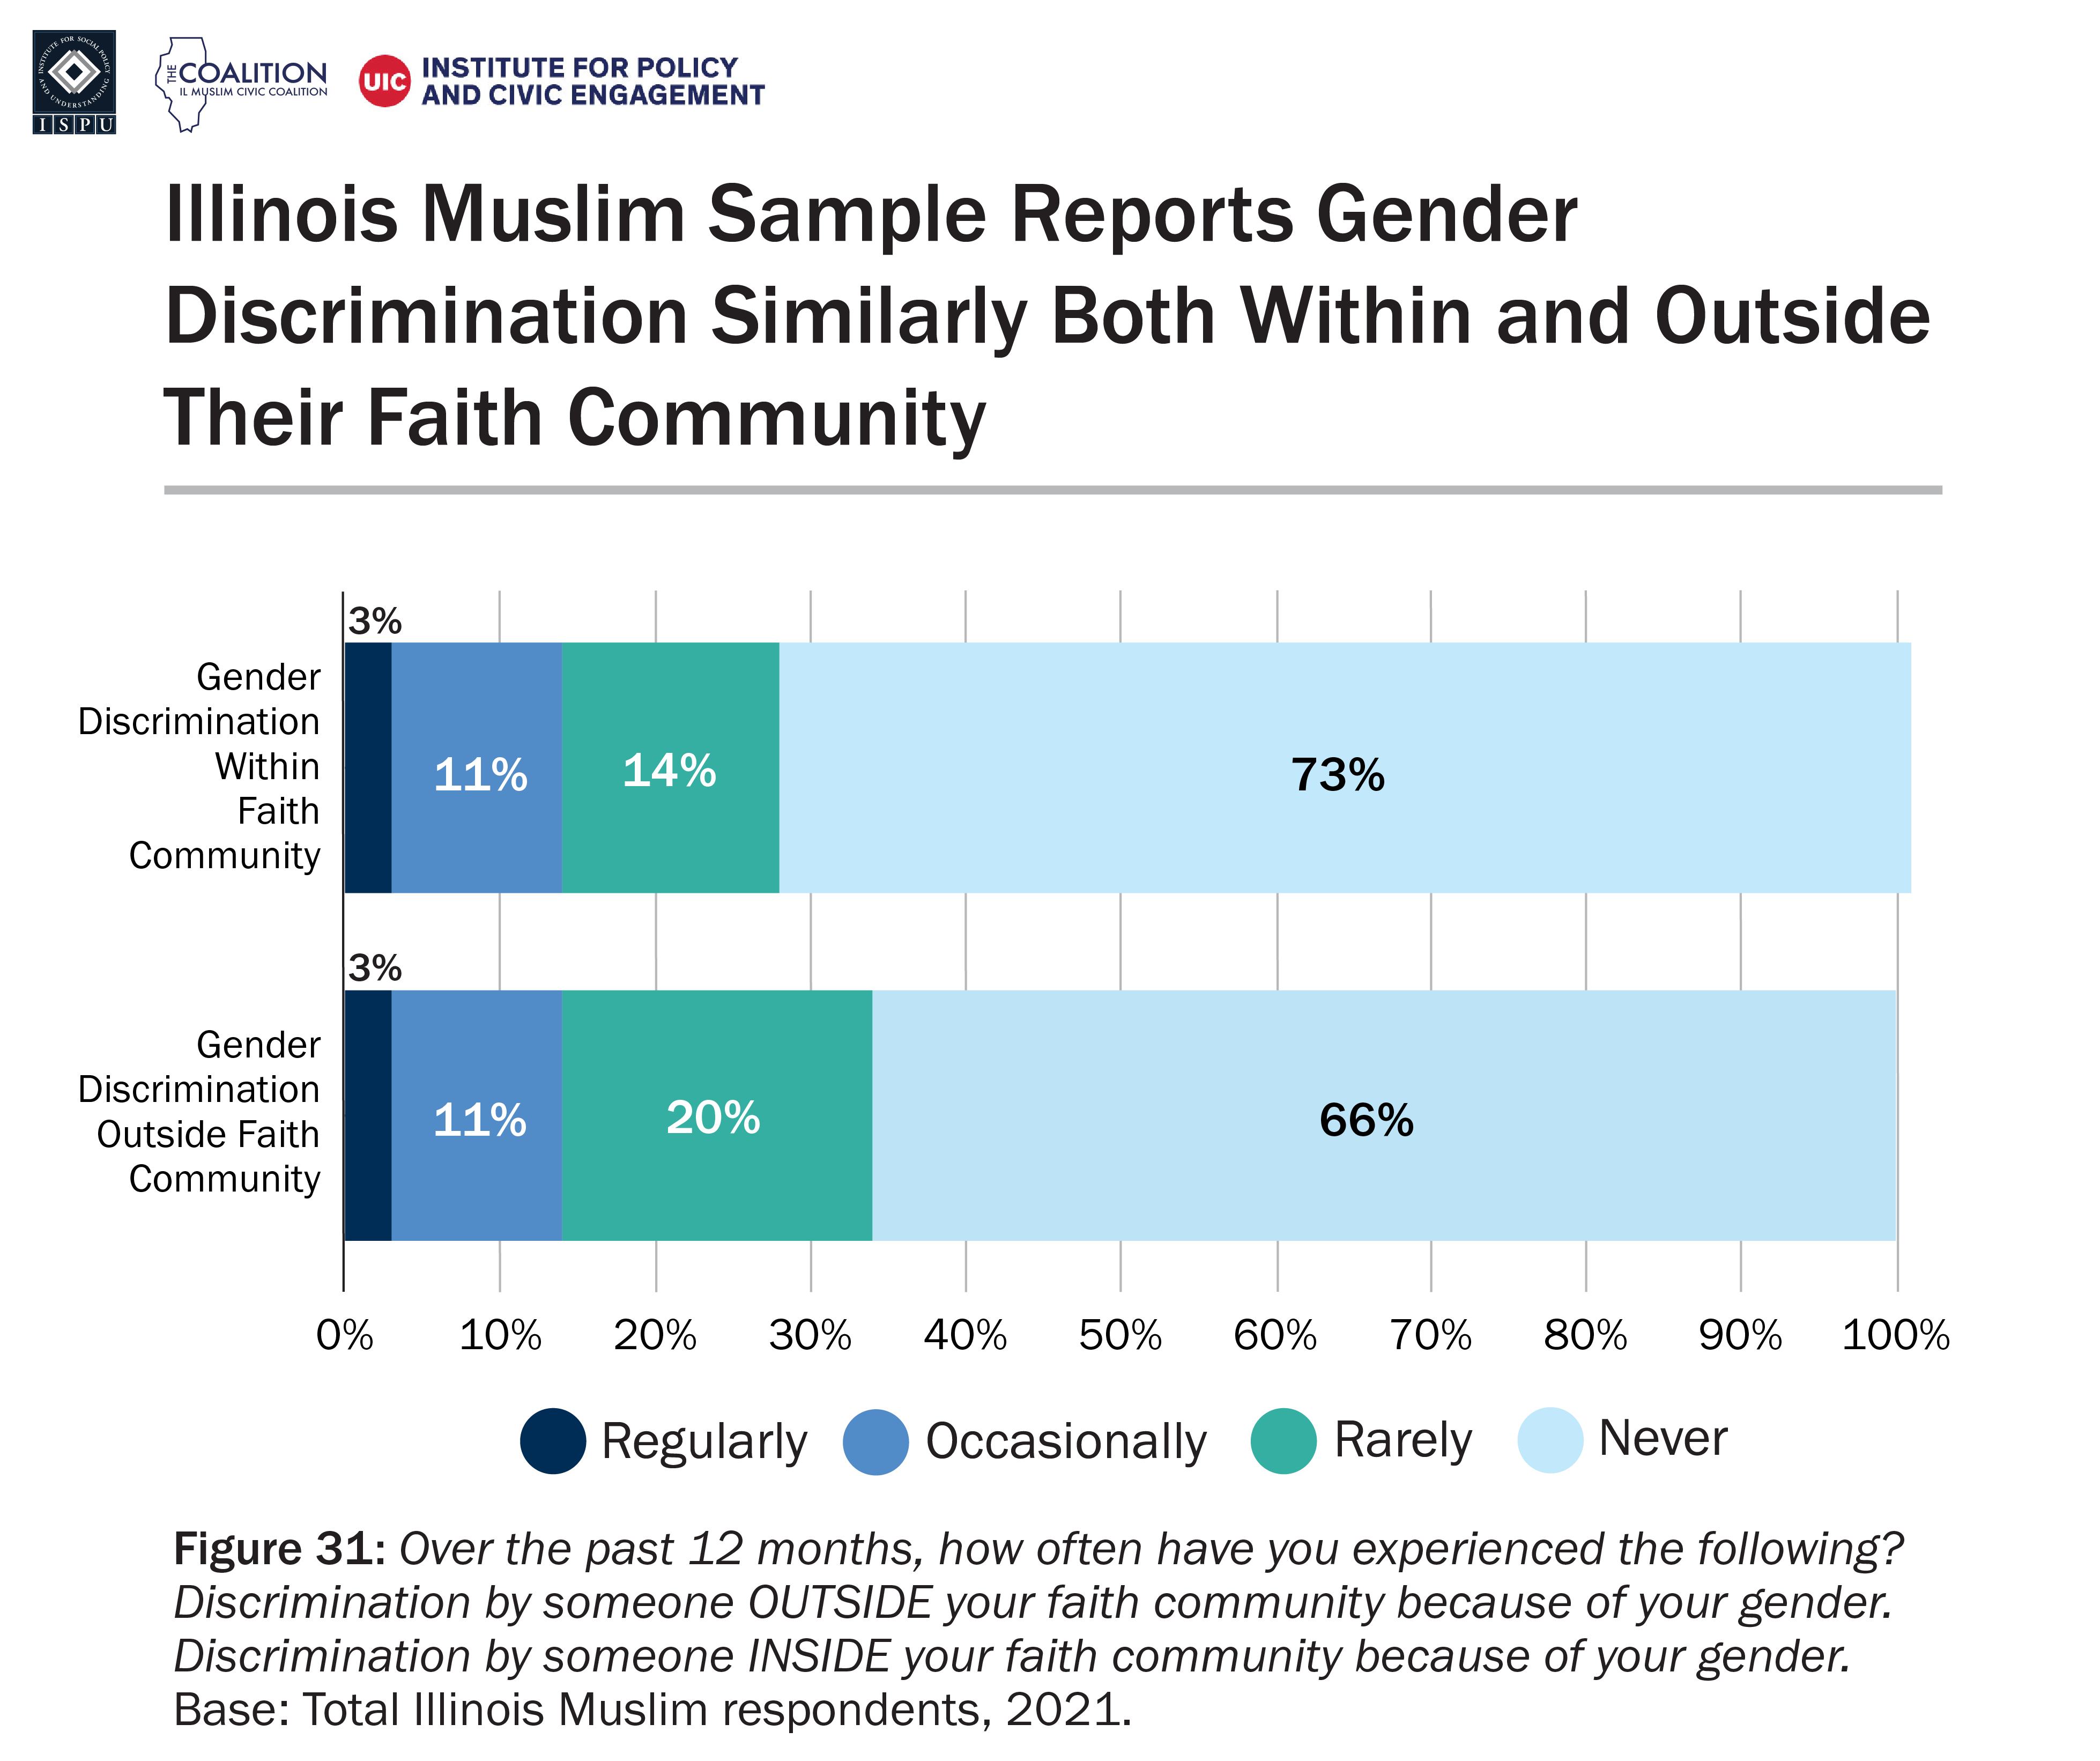 A bar graph showing frequency of gender discrimination occurring from within and outside of faith community among the Illinois Muslim sample.